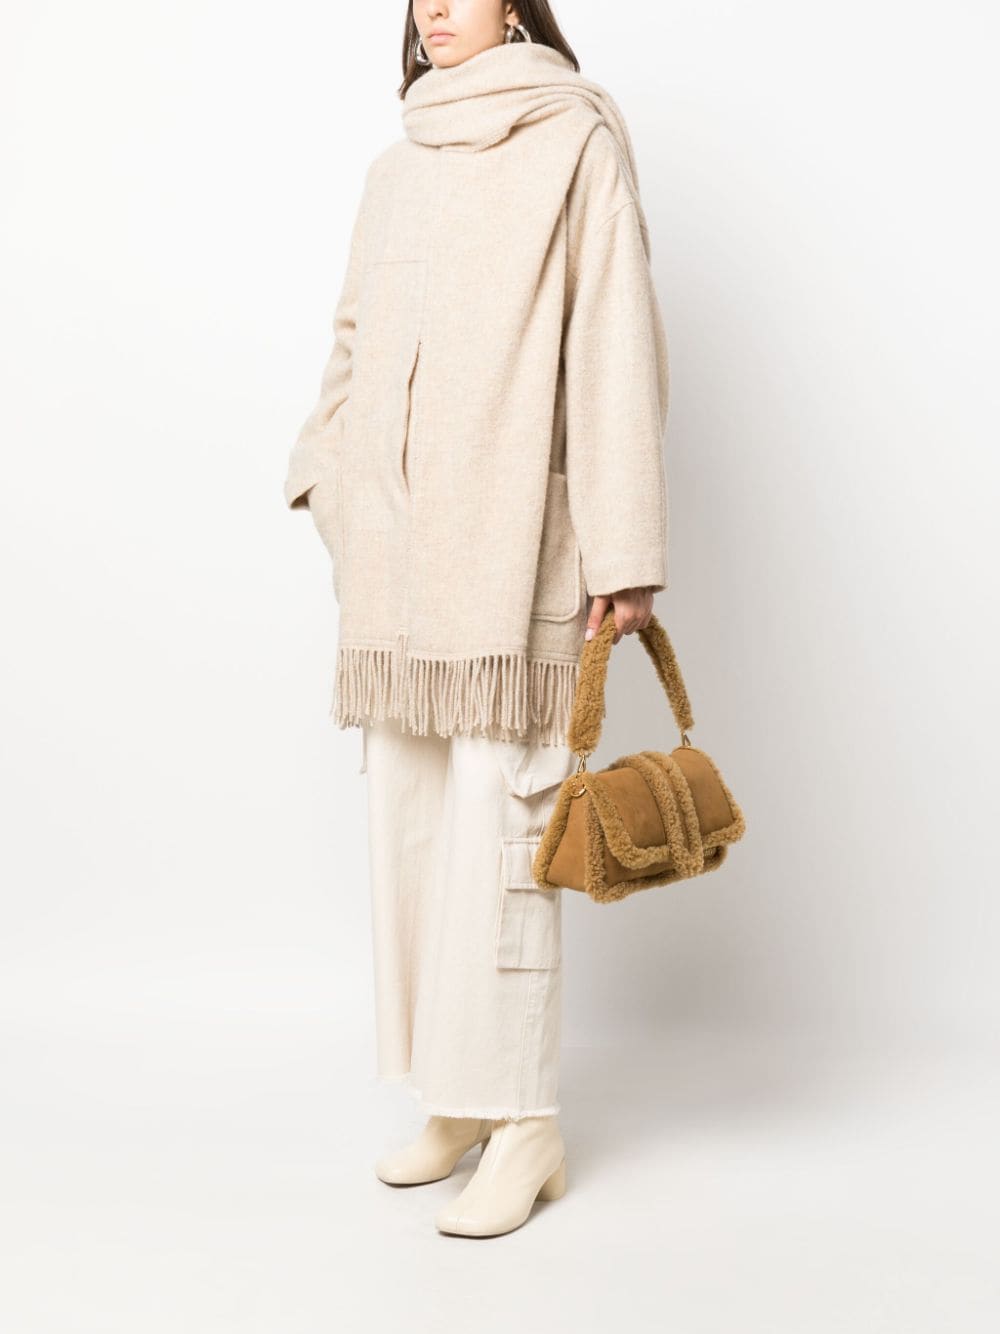 ISABEL MARANT ETOILE Effortless Style: Recycled Wool Cape in Ecrucast by Marant Étoile